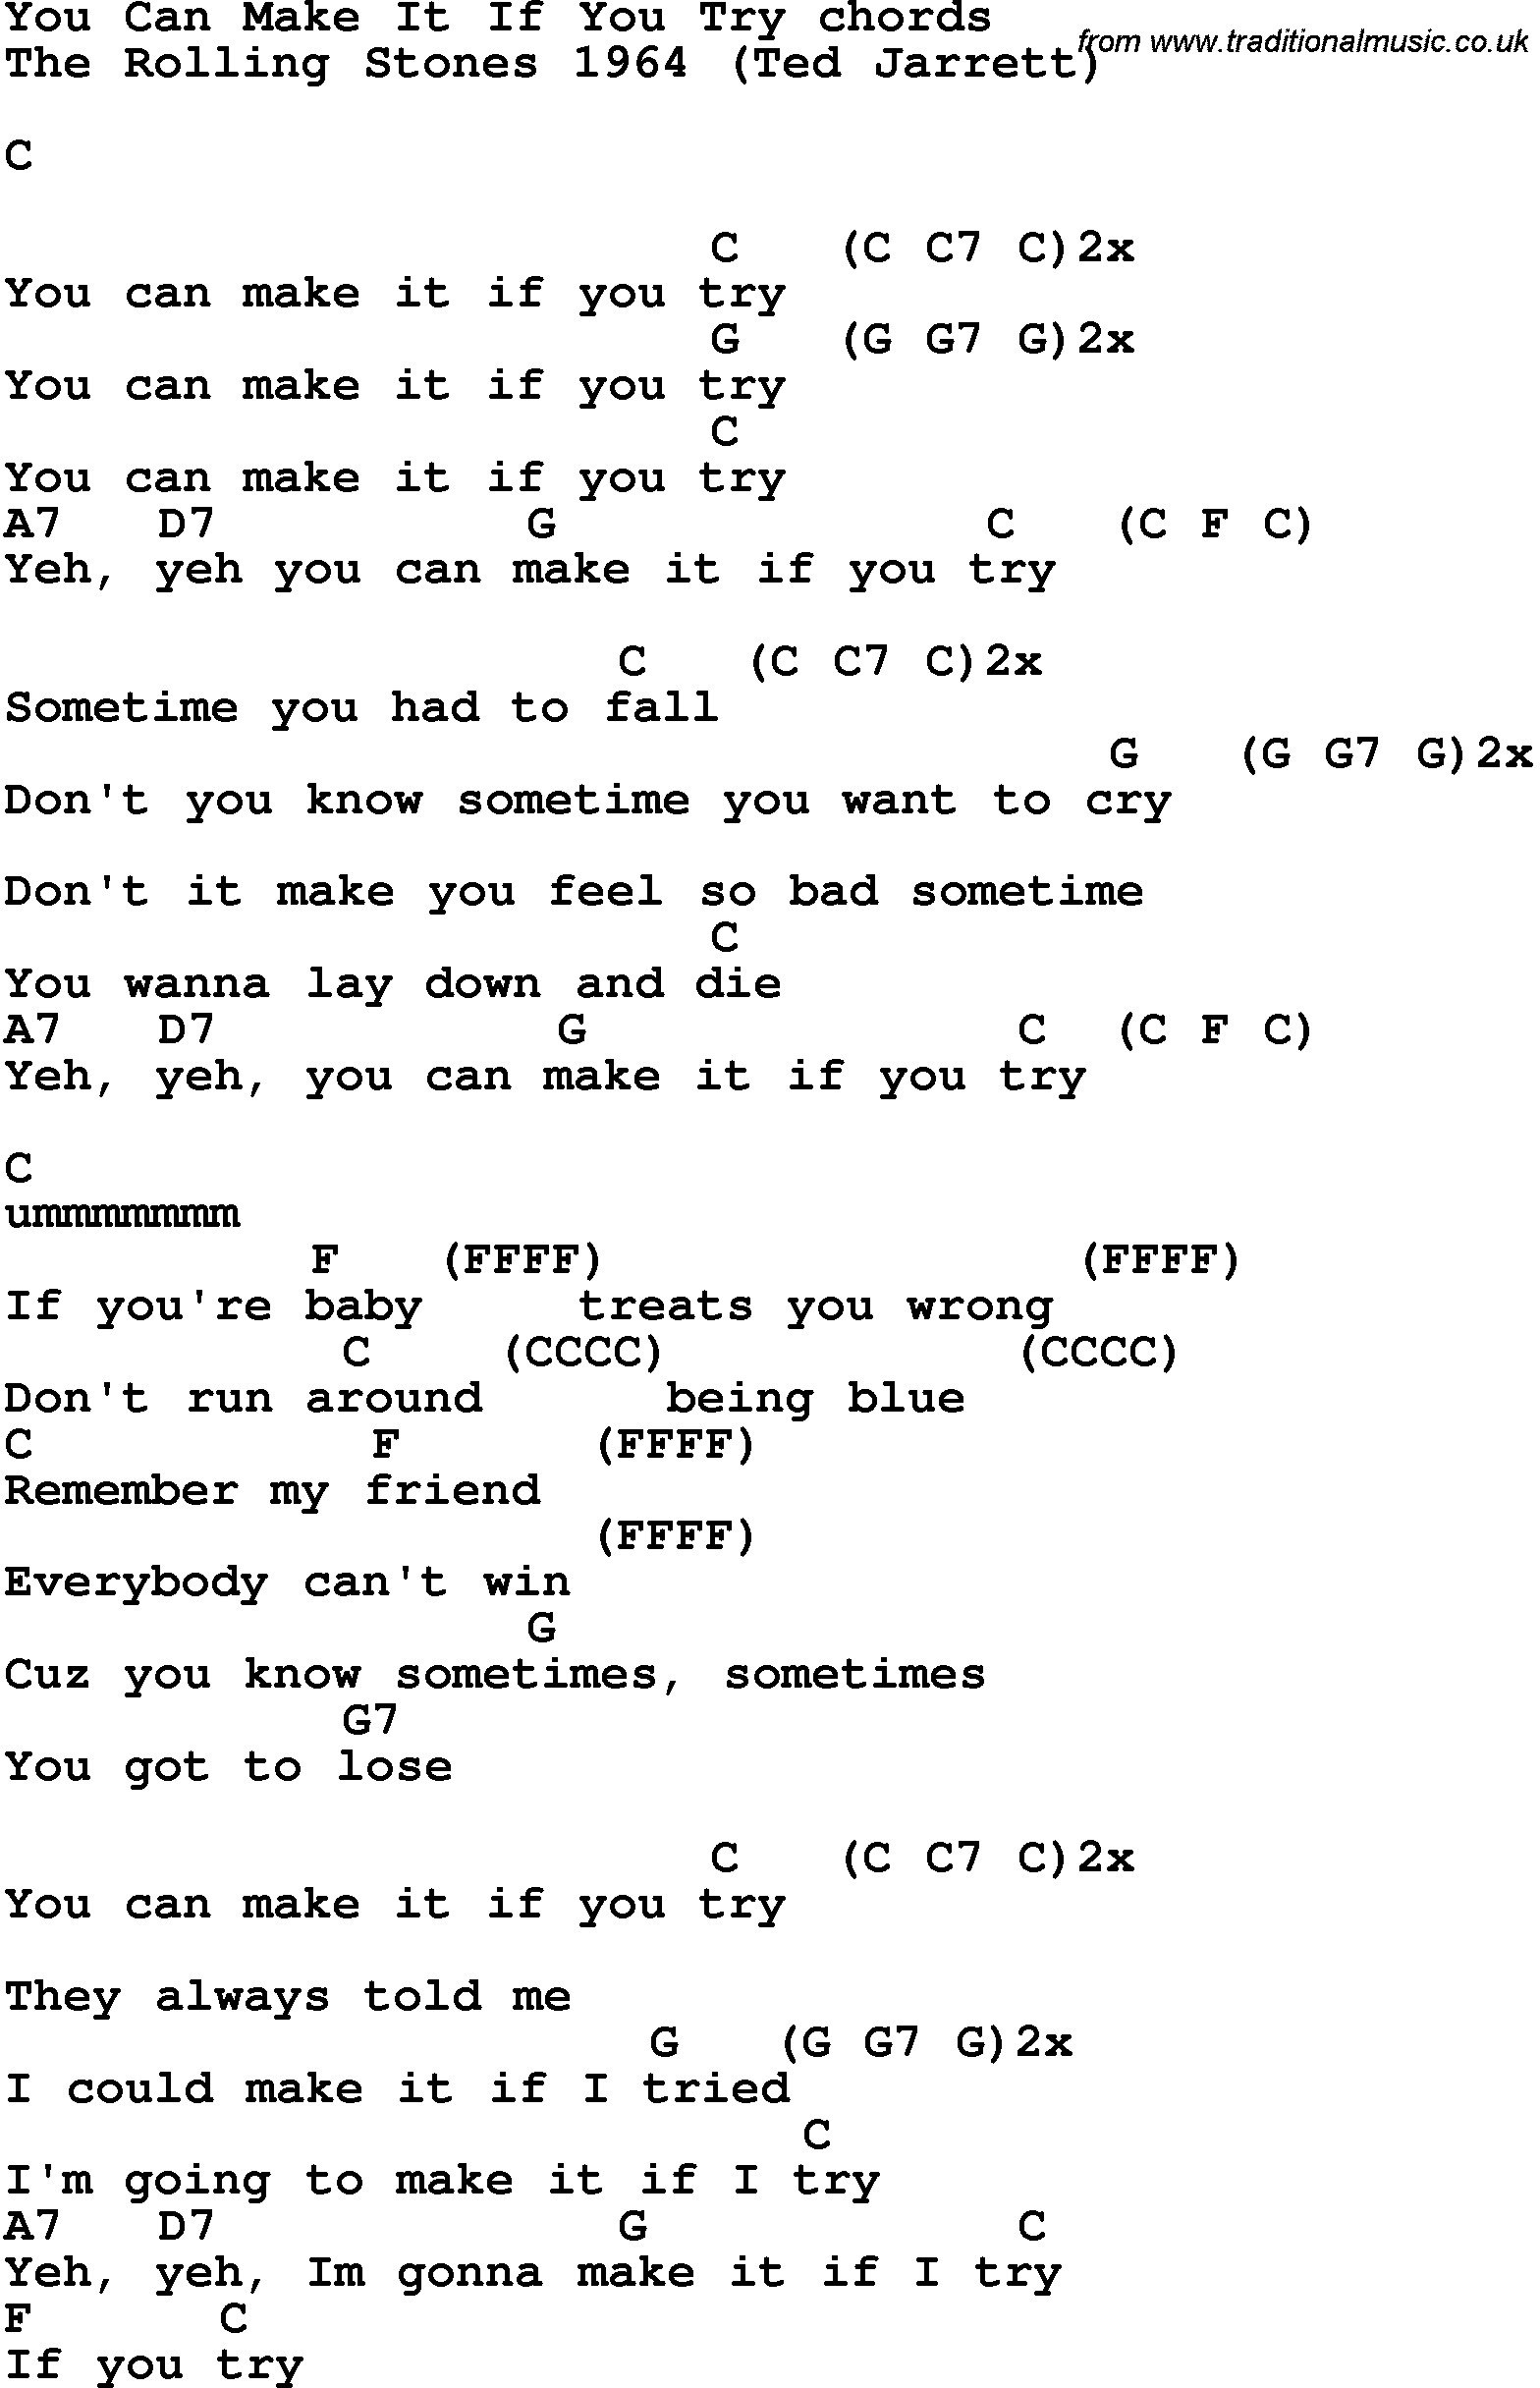 Song Lyrics with guitar chords for You Can Make It If You Try